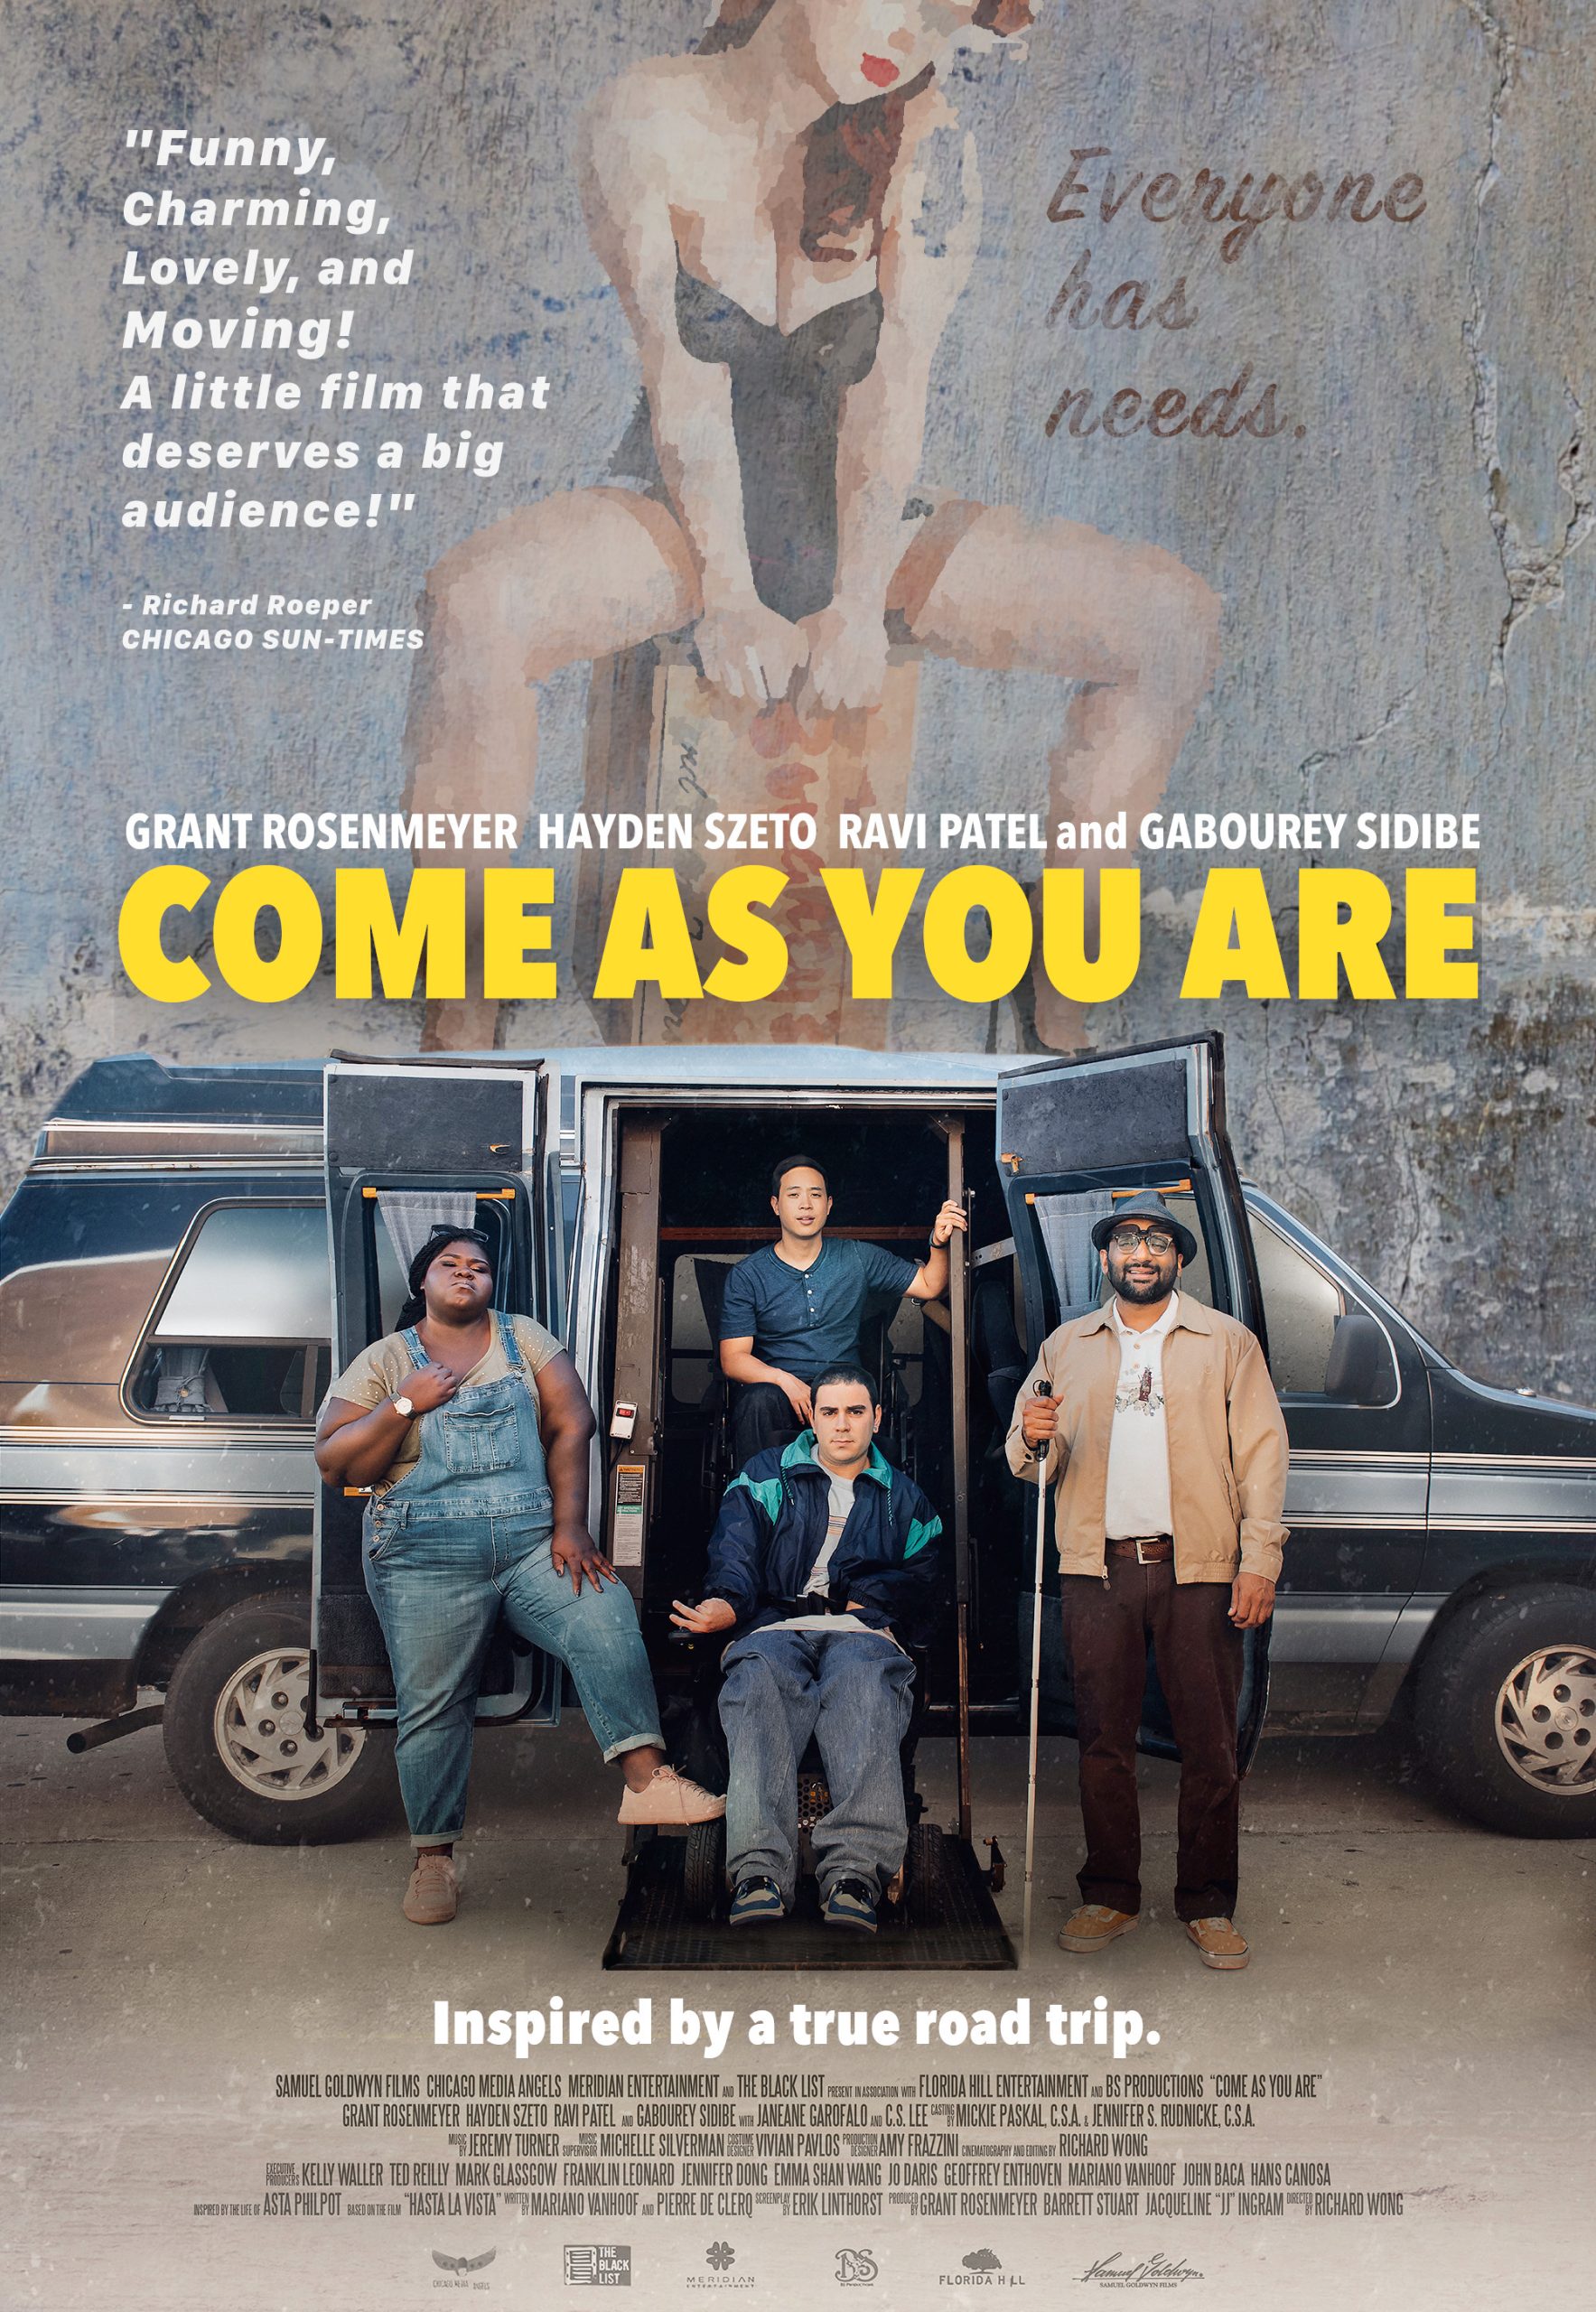 Come As You Are (2019) Grant Rosenmeyer